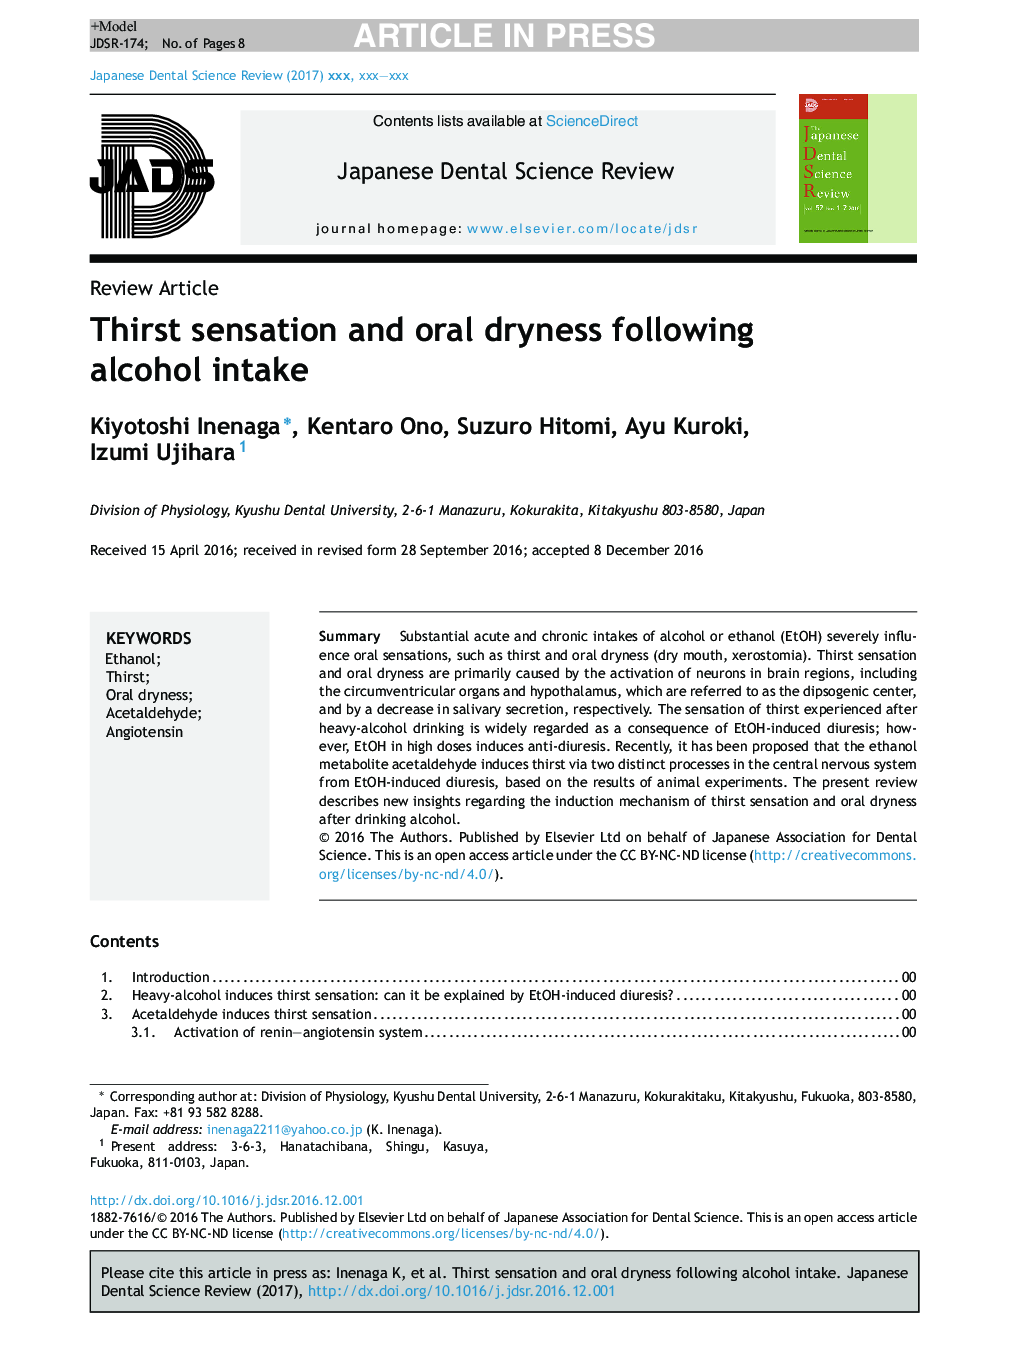 Thirst sensation and oral dryness following alcohol intake